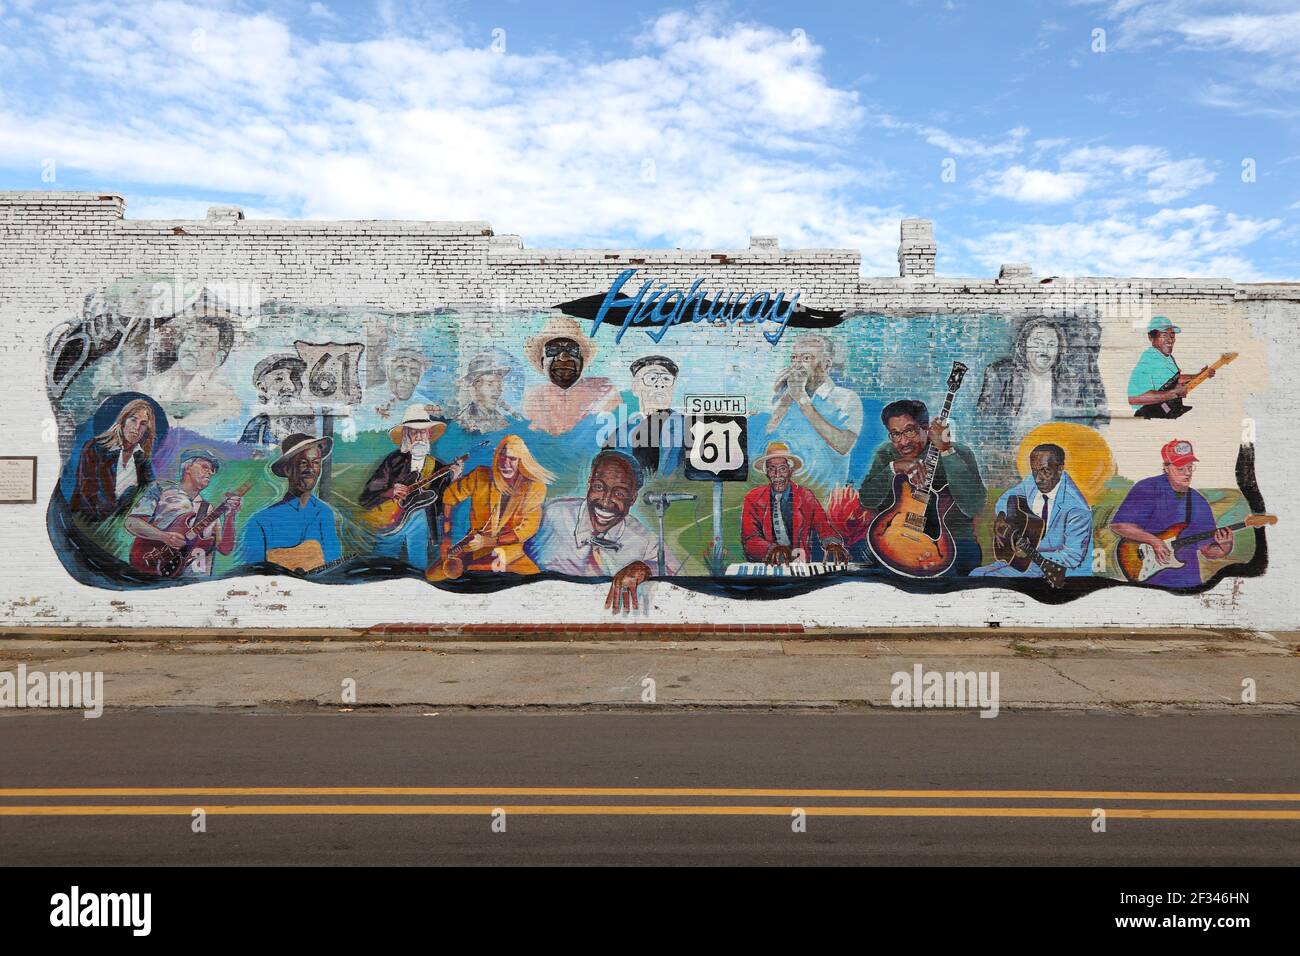 Geographie / Reisen, USA, Mississippi, Leland, Hayway 61 Mural mit Blues-Musiker, Leland, Additional-Rights-Clearance-Info-not-available Stockfoto